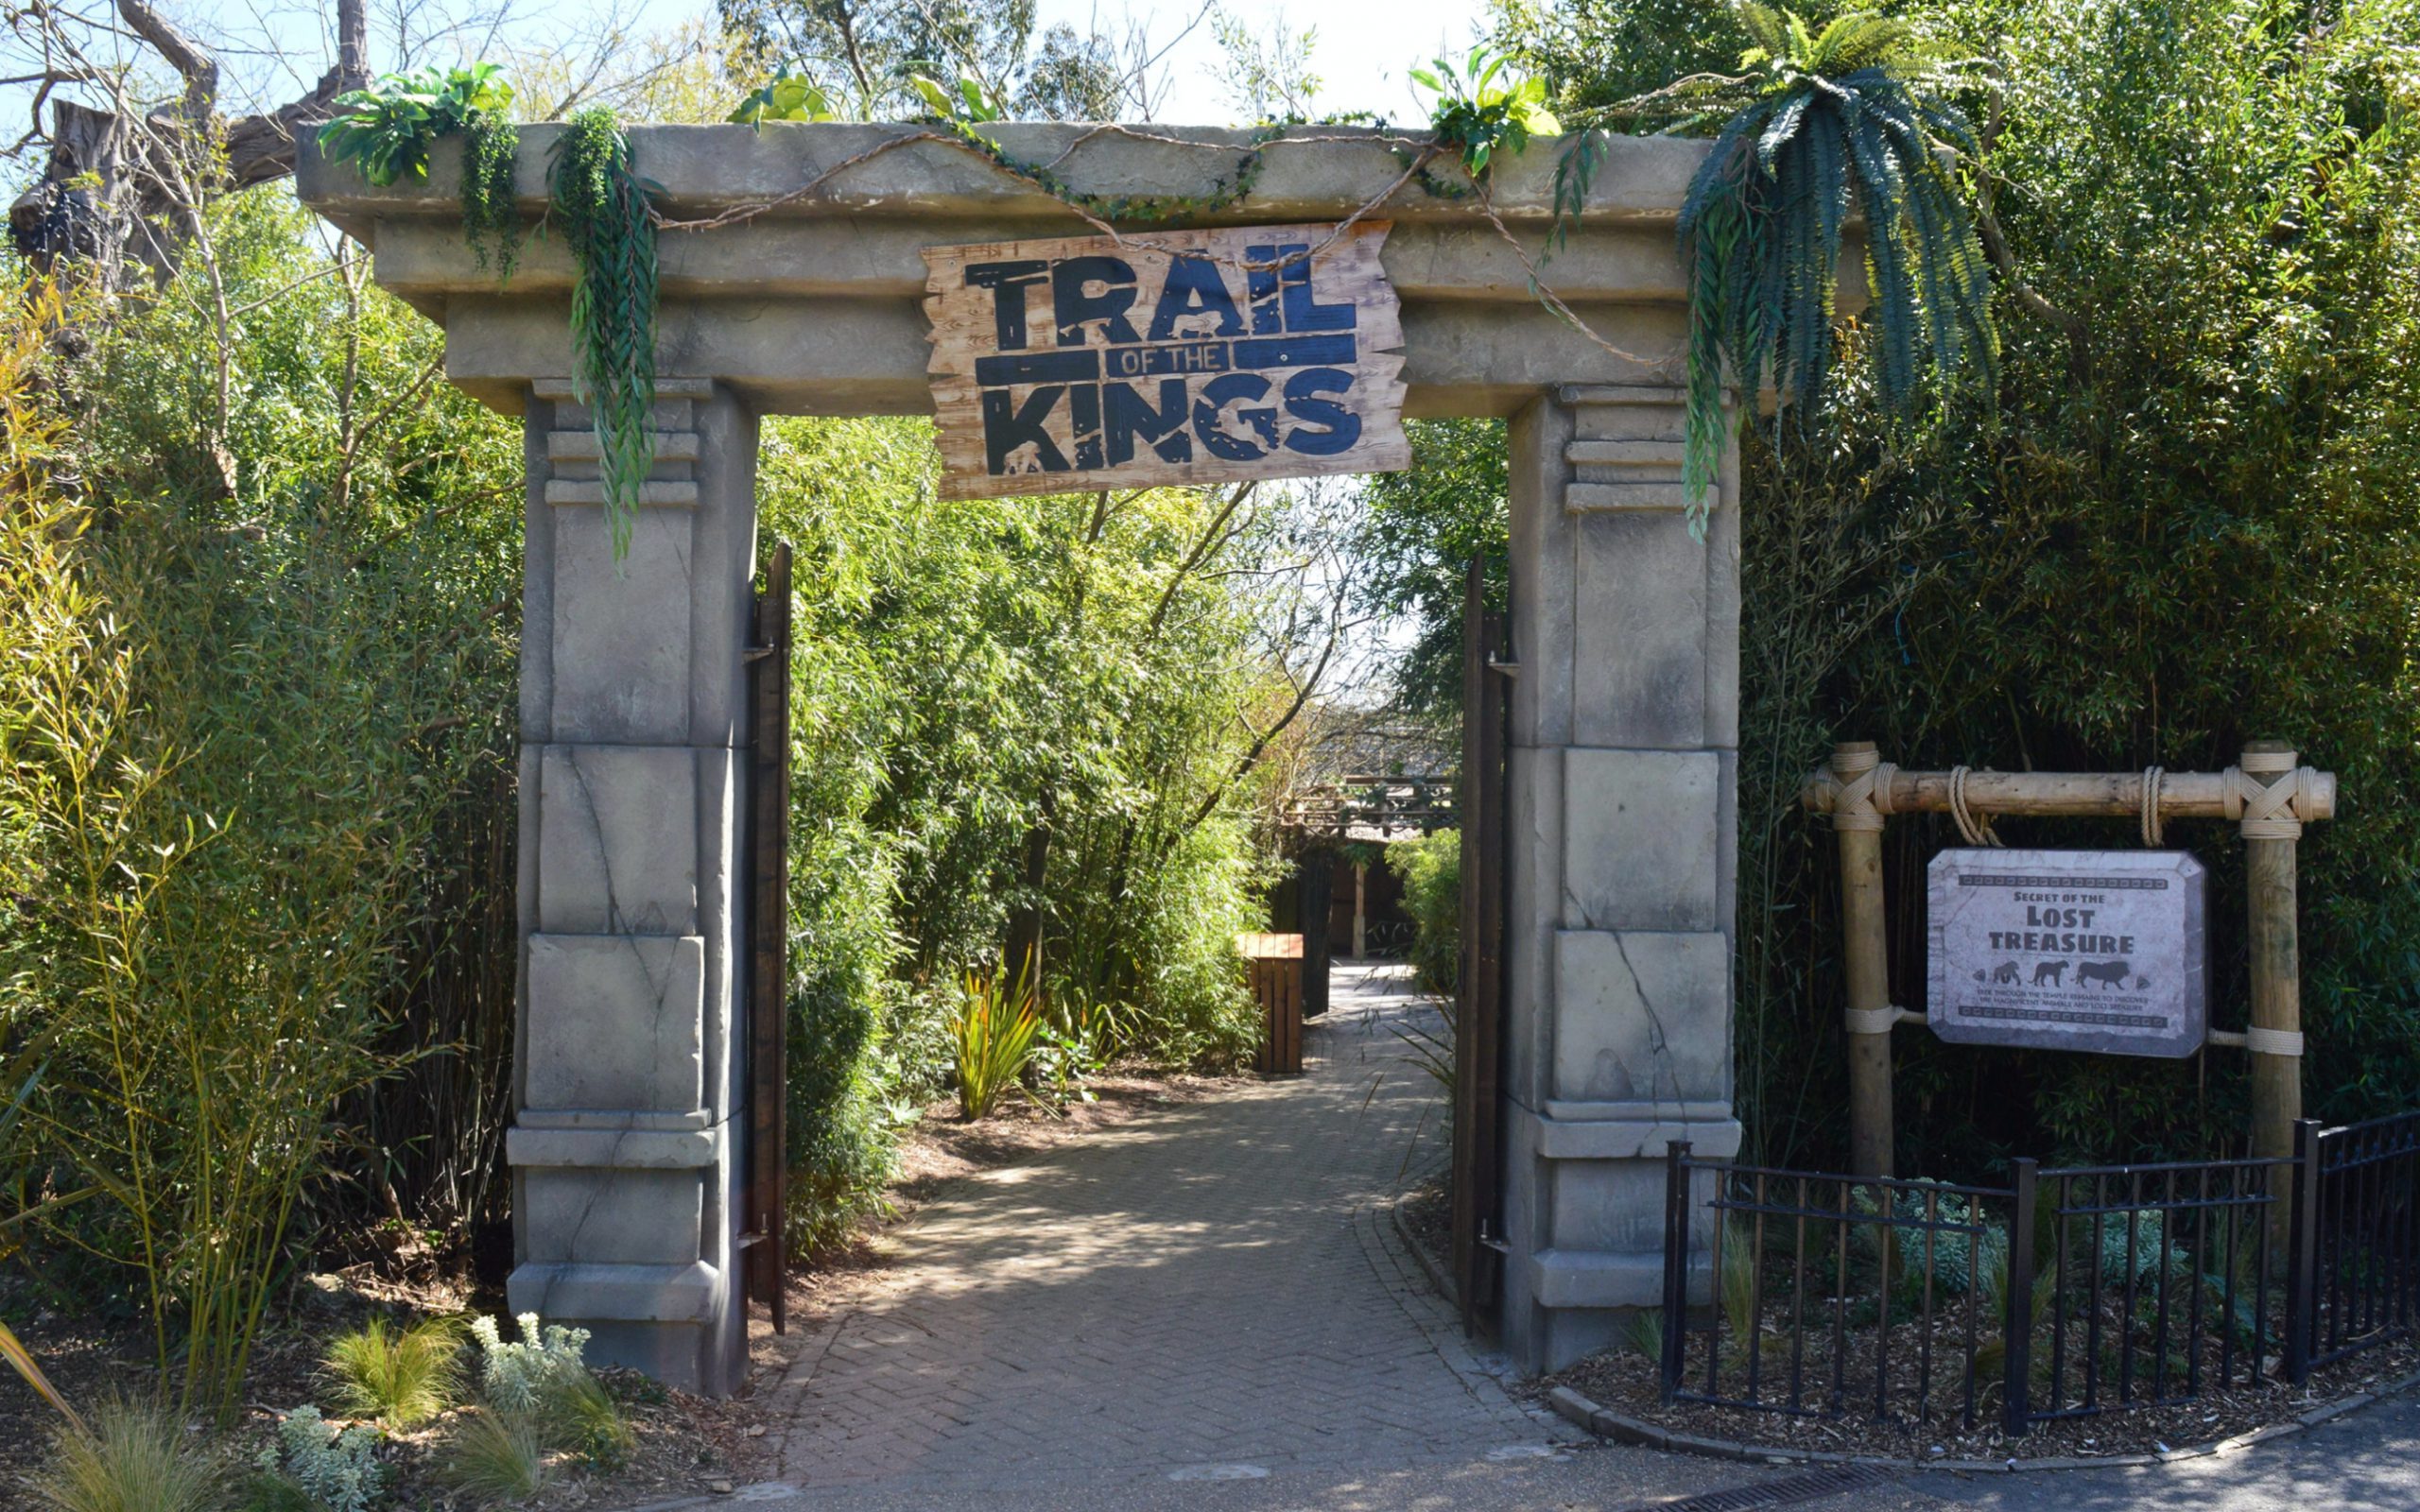 Trail of the kings entrance area